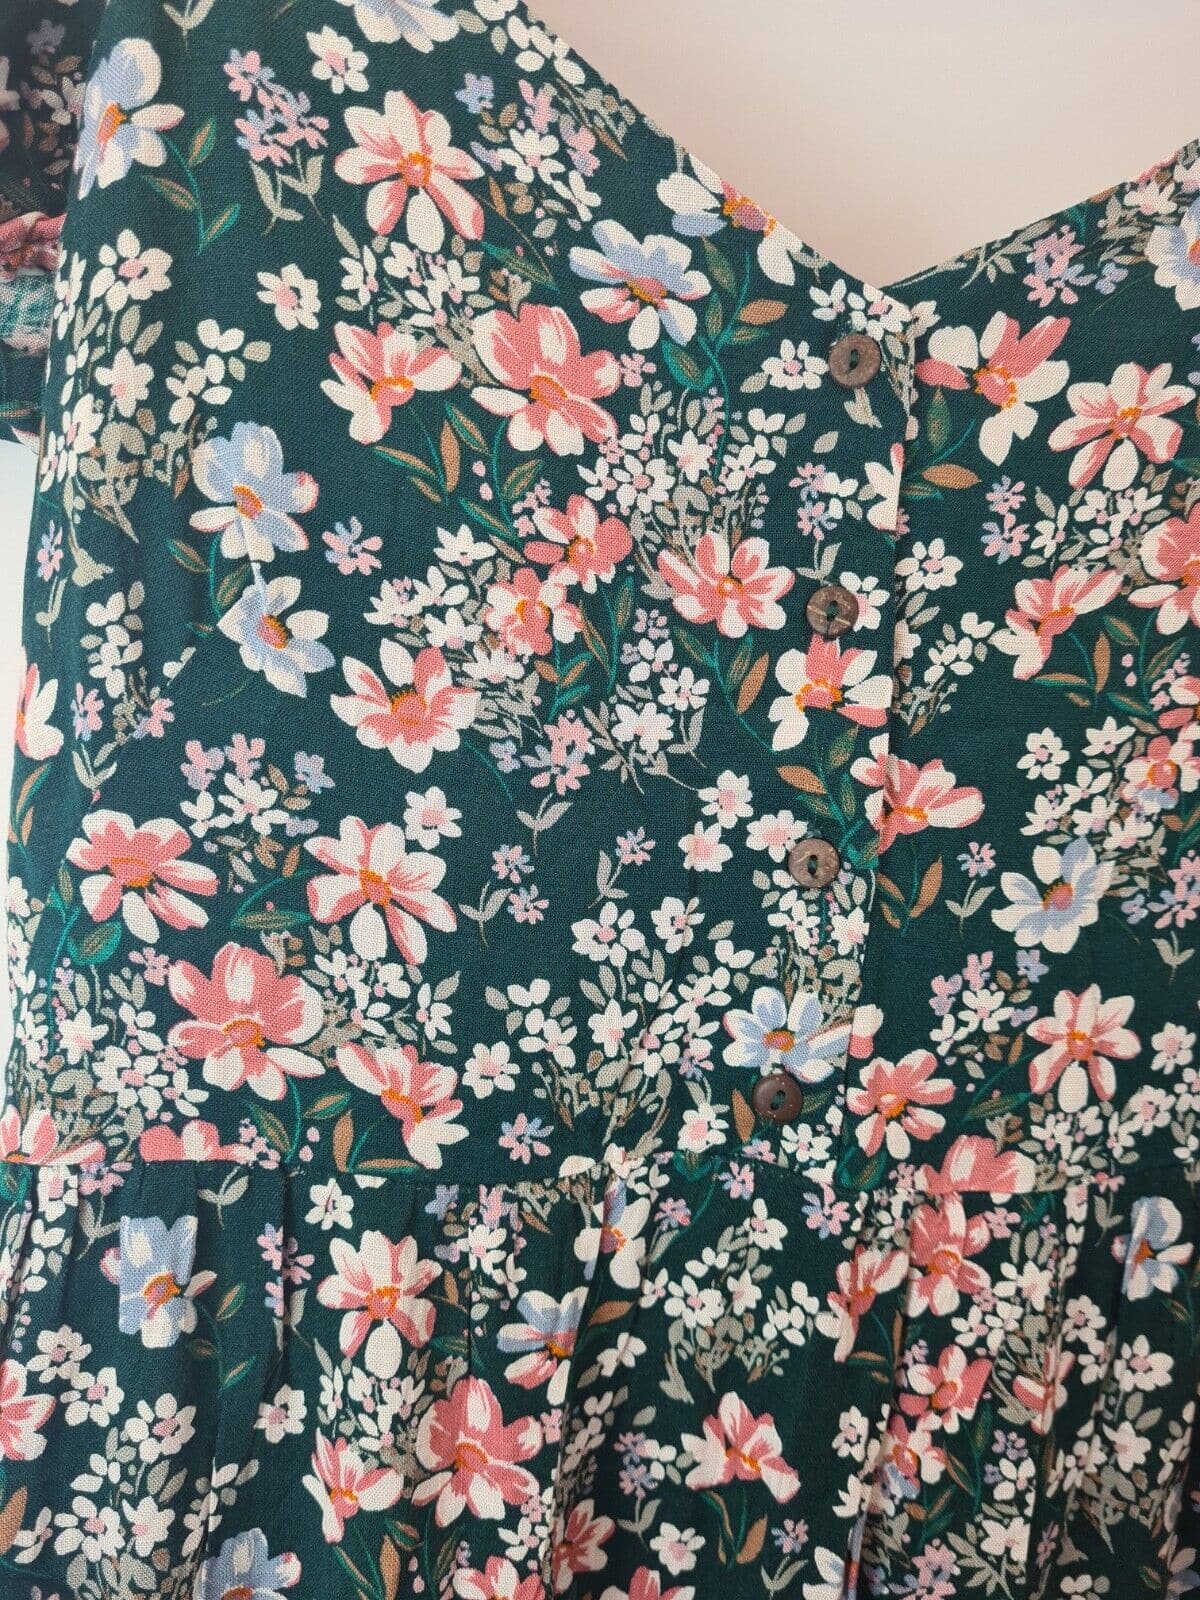 Apricot Green Ditsy Floral Button Front Midi Dress Size 10 **** V30 - Big_Stock_Clearance